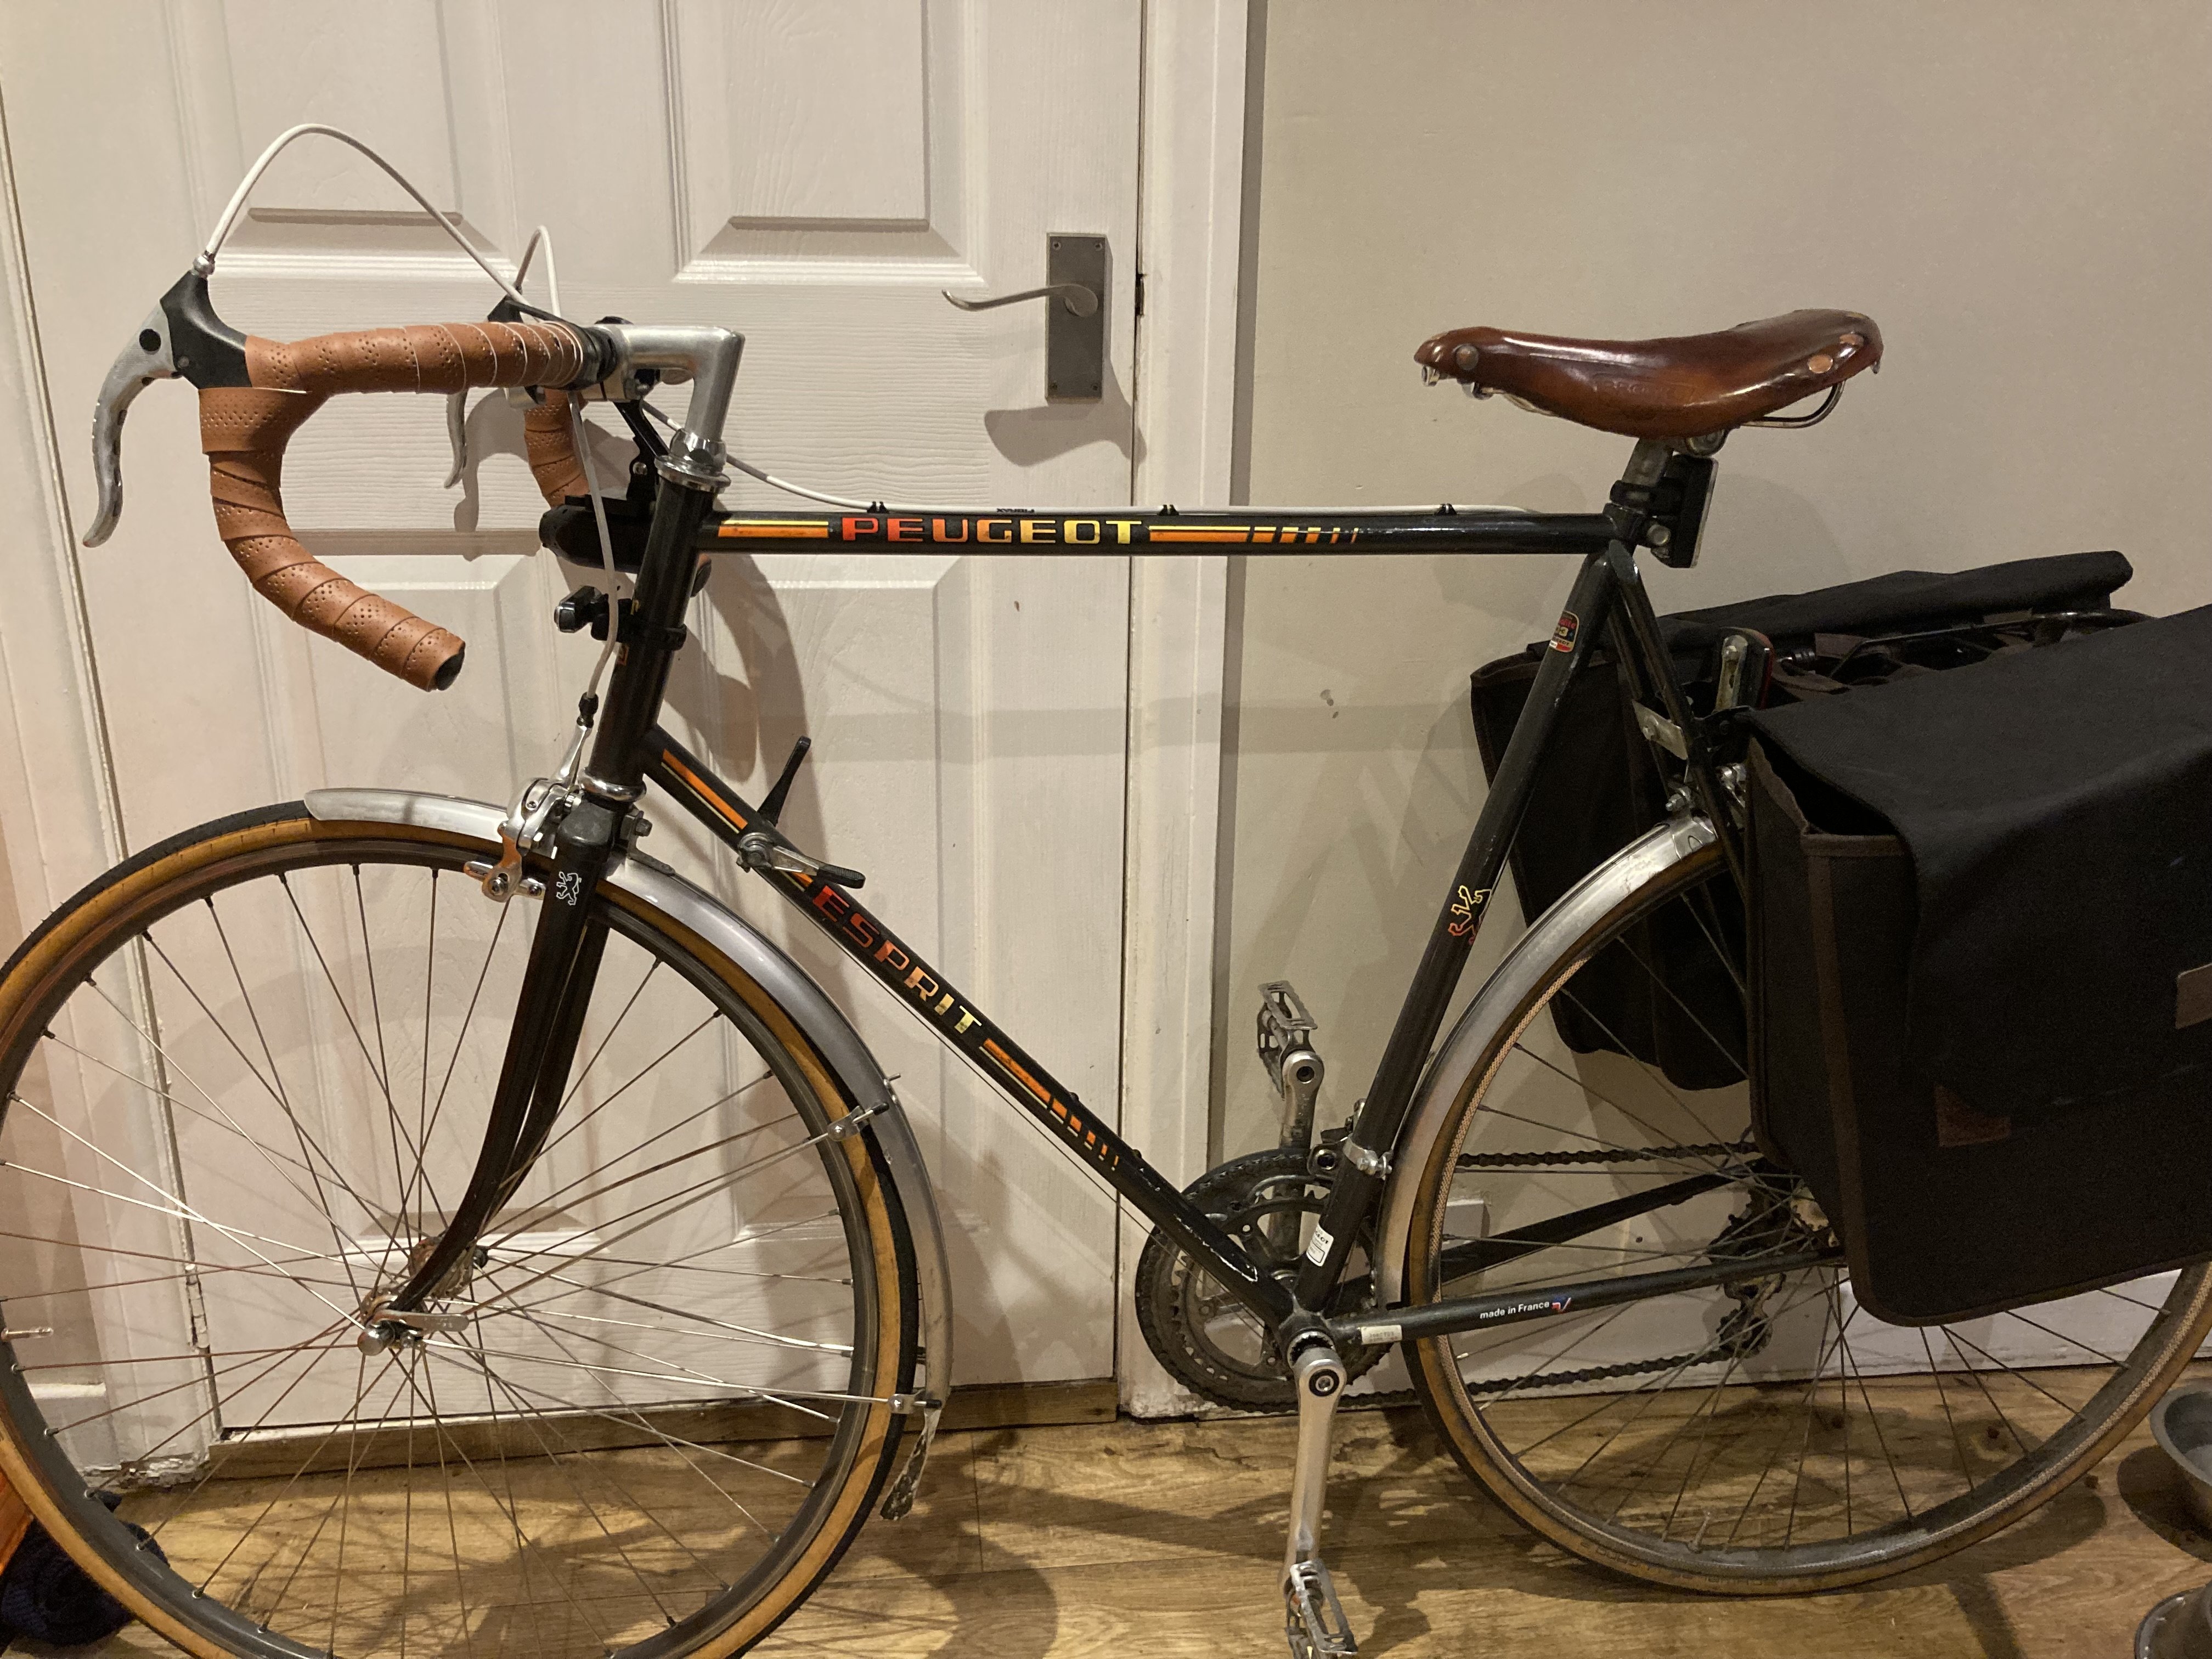 Vintage Peugeot bike, with fresh brown handlebar tape, a new leather saddle, and rear pannier bags